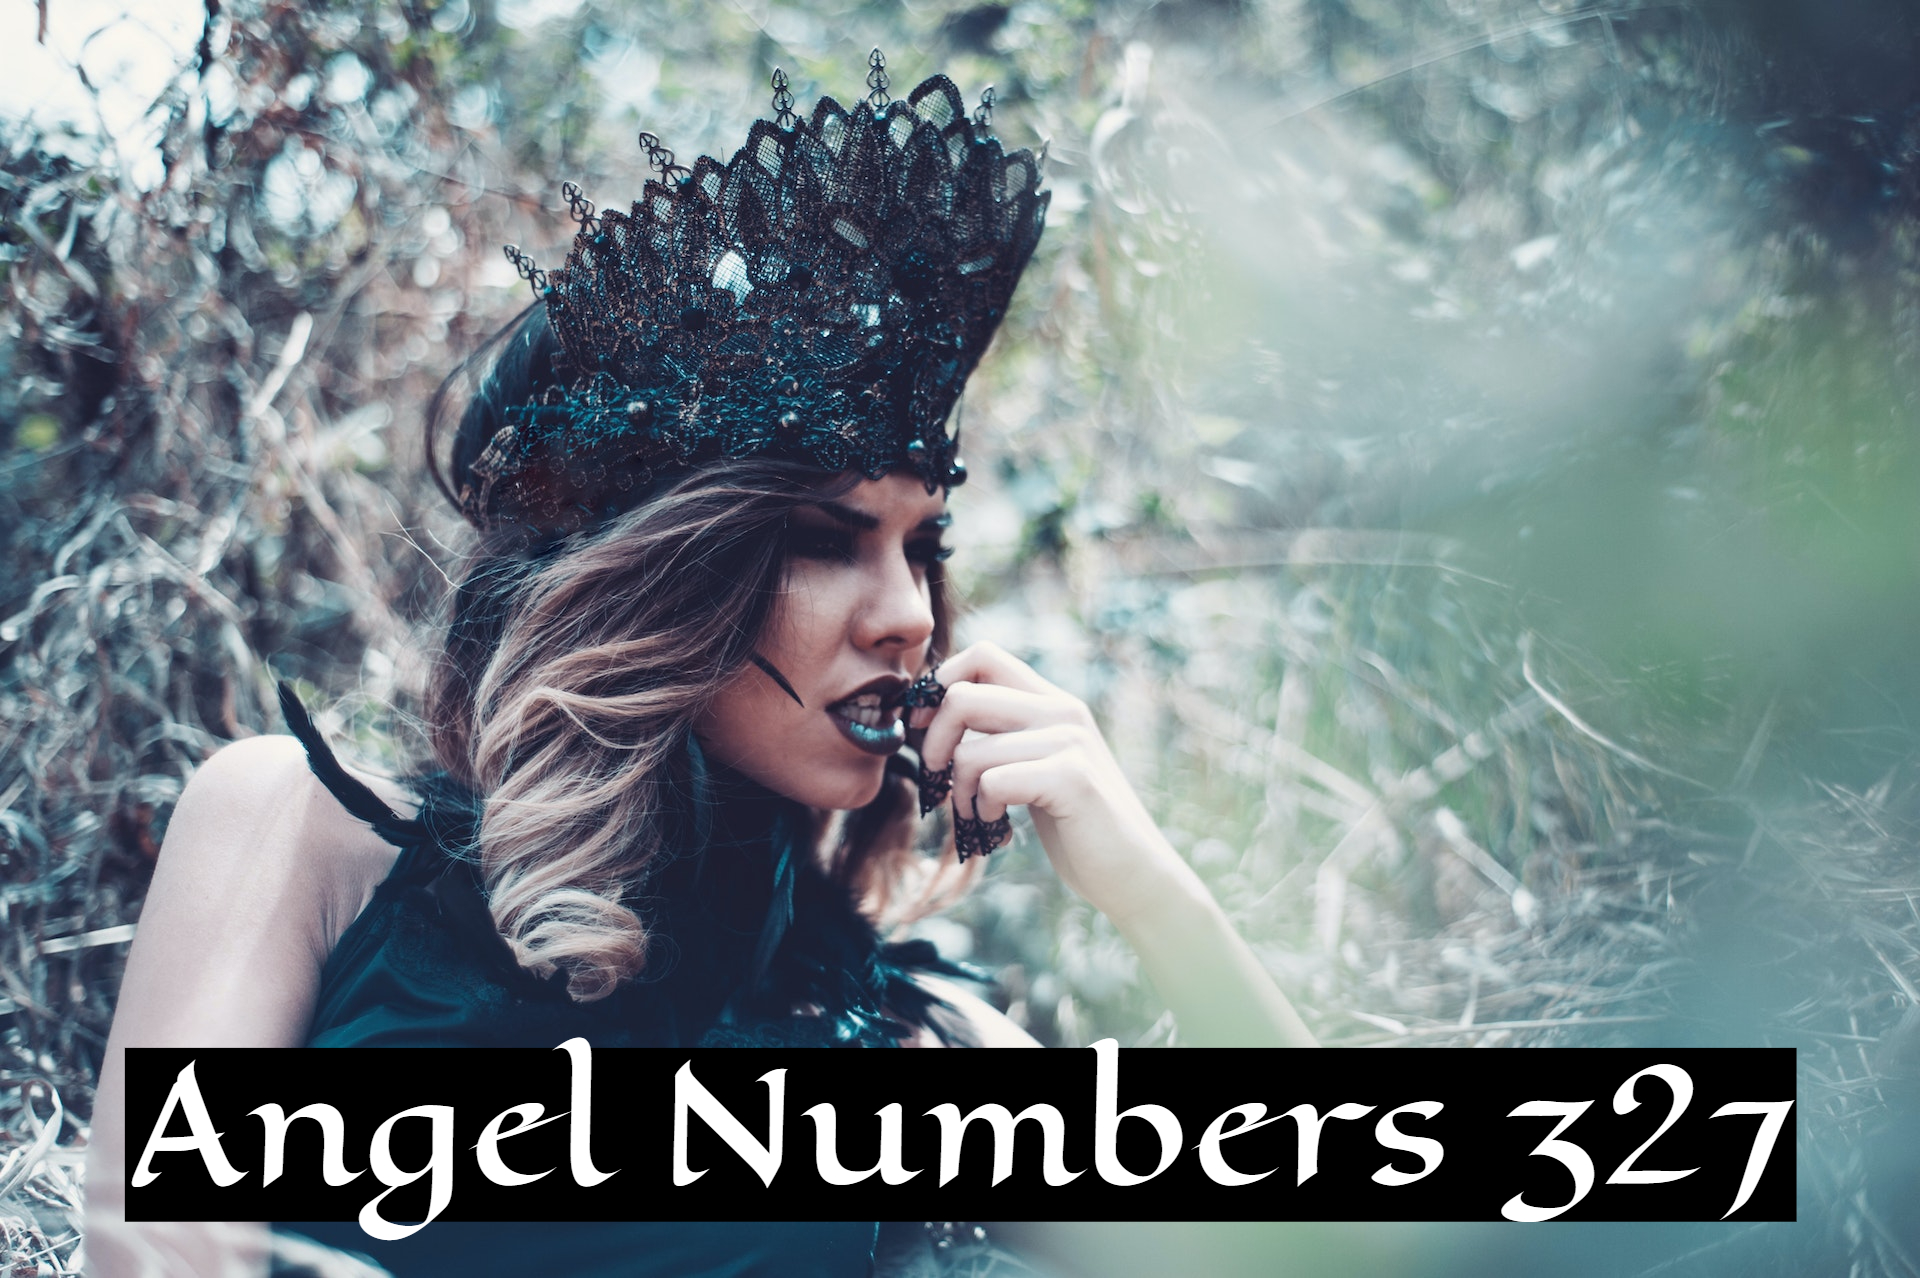 Angel Numbers 327 - A Sign Of Peace And Harmony